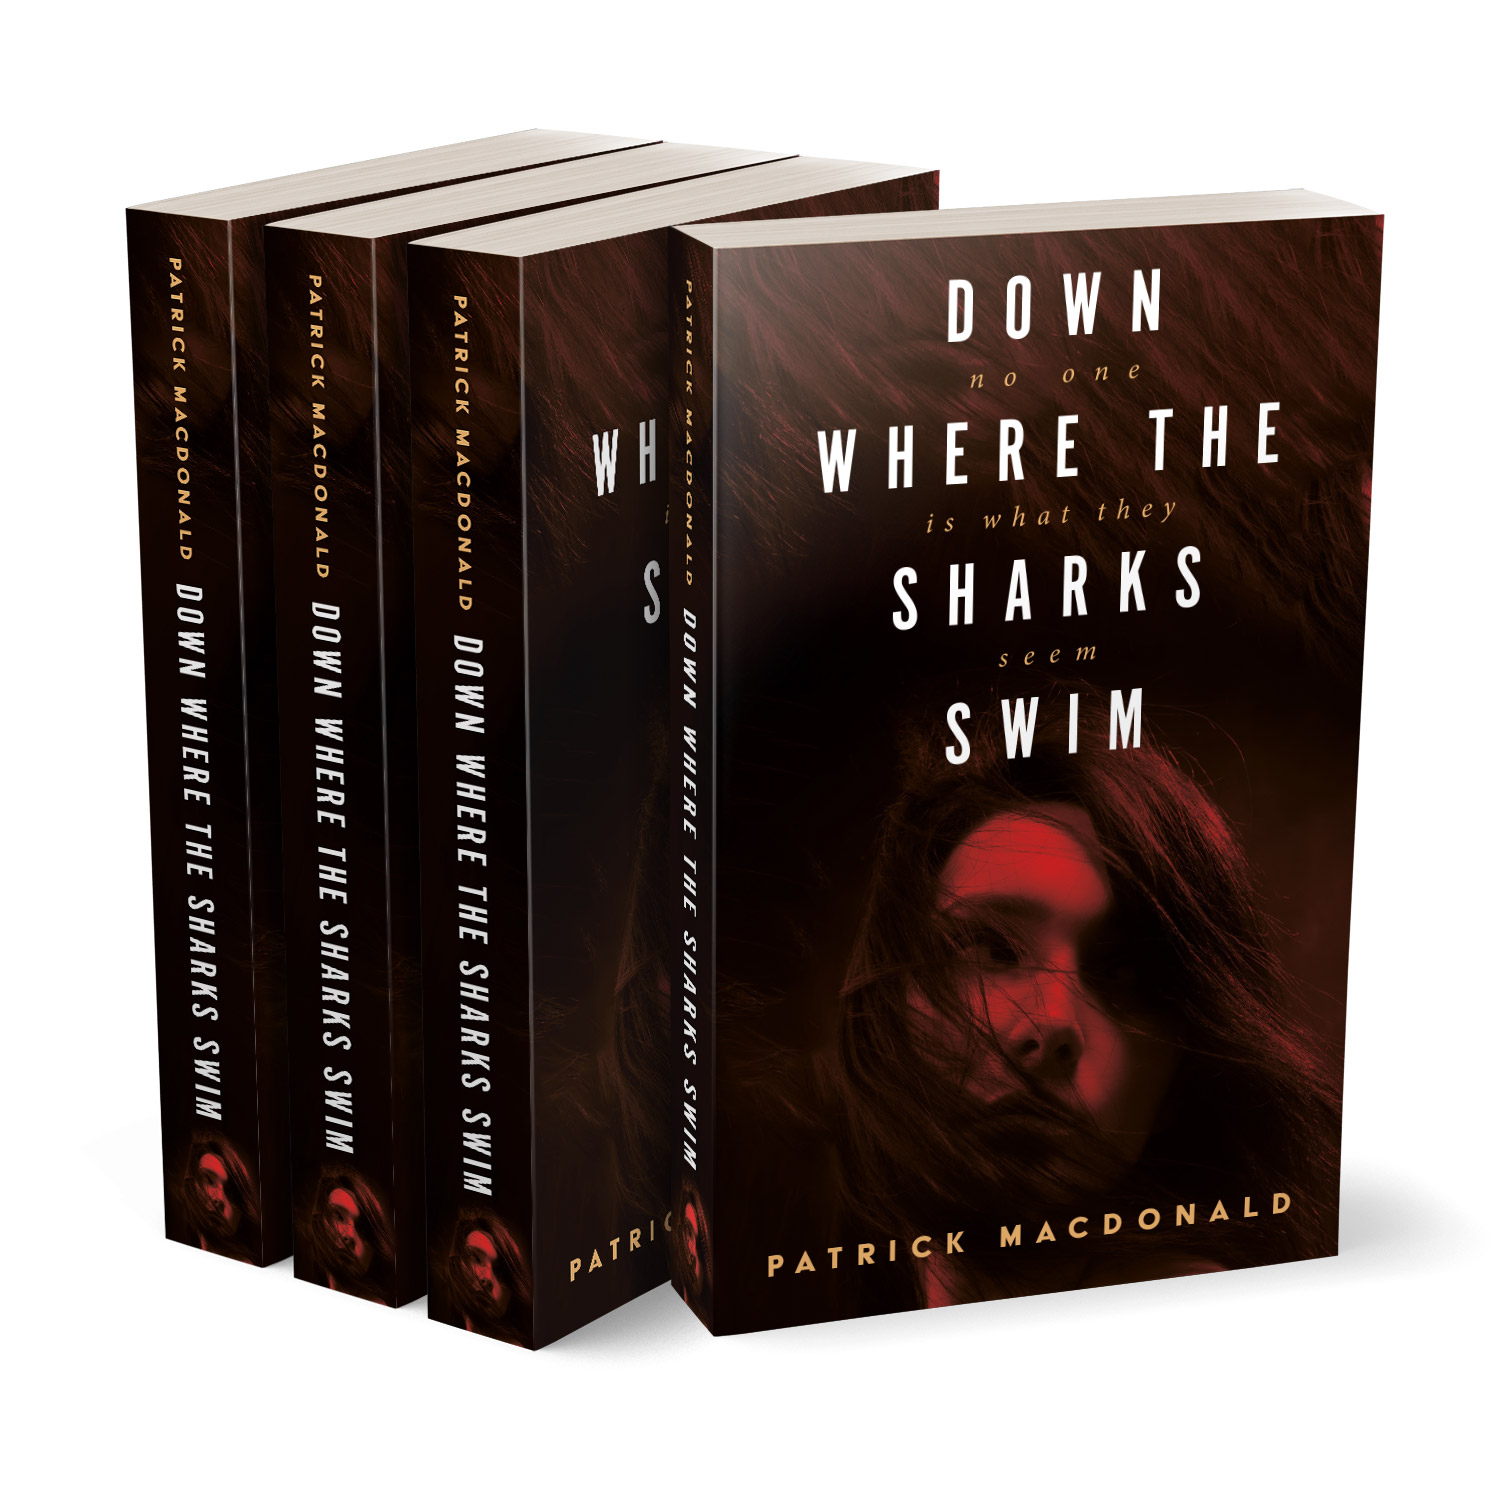 'Down Where The Sharks Swim' is a London set, female-focussed novel. The author is Patrick MacDonald. The book cover design and interior formatting are by Mark Thomas. To learn more about what Mark could do for your book, please visit coverness.com.